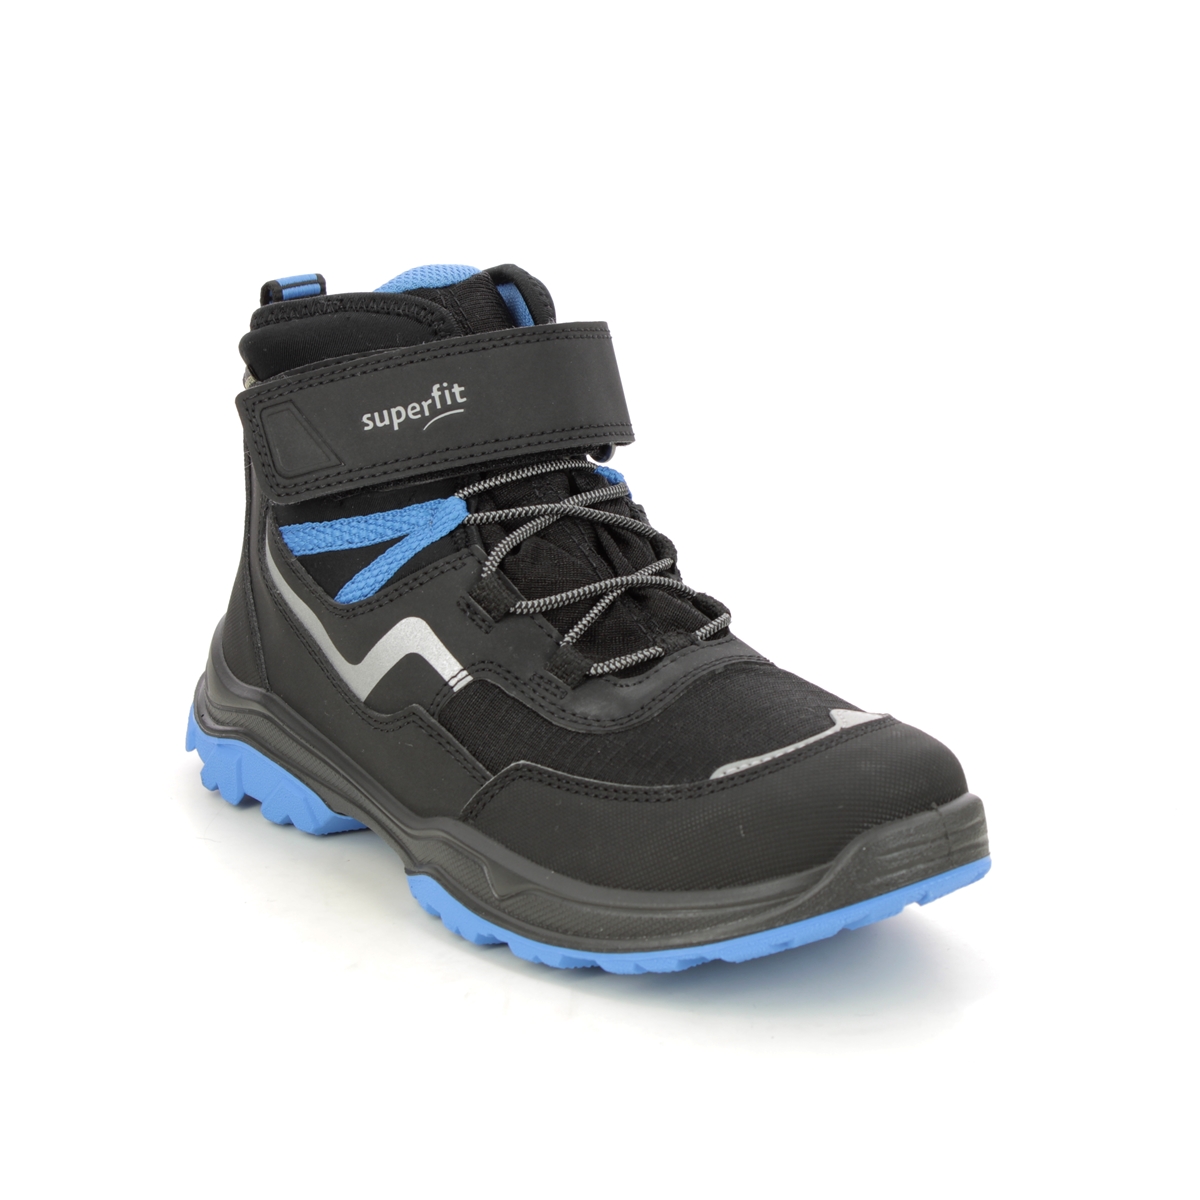 Superfit Jupiter Bungee Gtx Black Kids boys boots 1000074-0010 in a Plain Man-made in Size 37